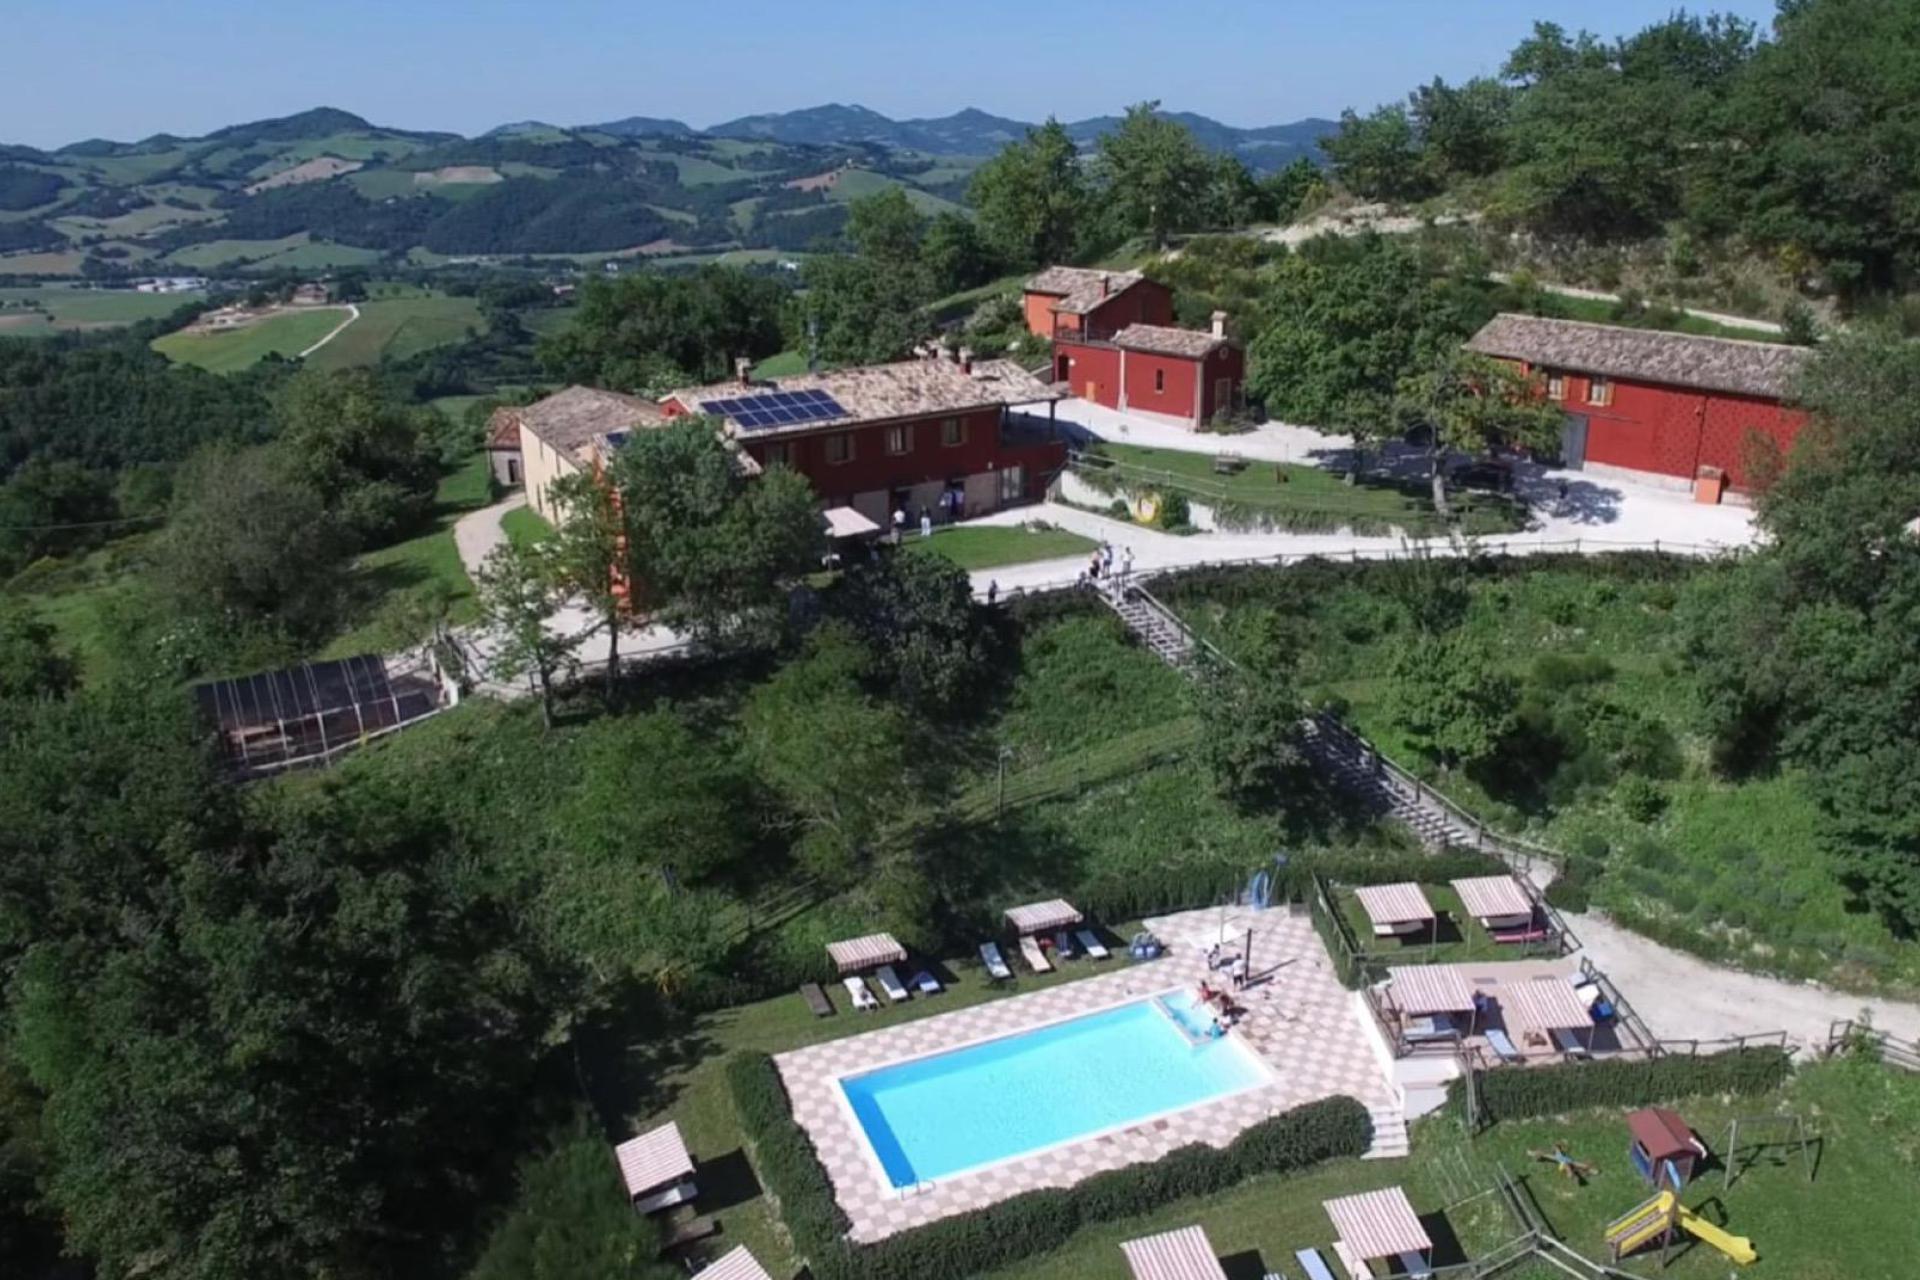 Lovely agriturismo in Marche with welcoming hosts